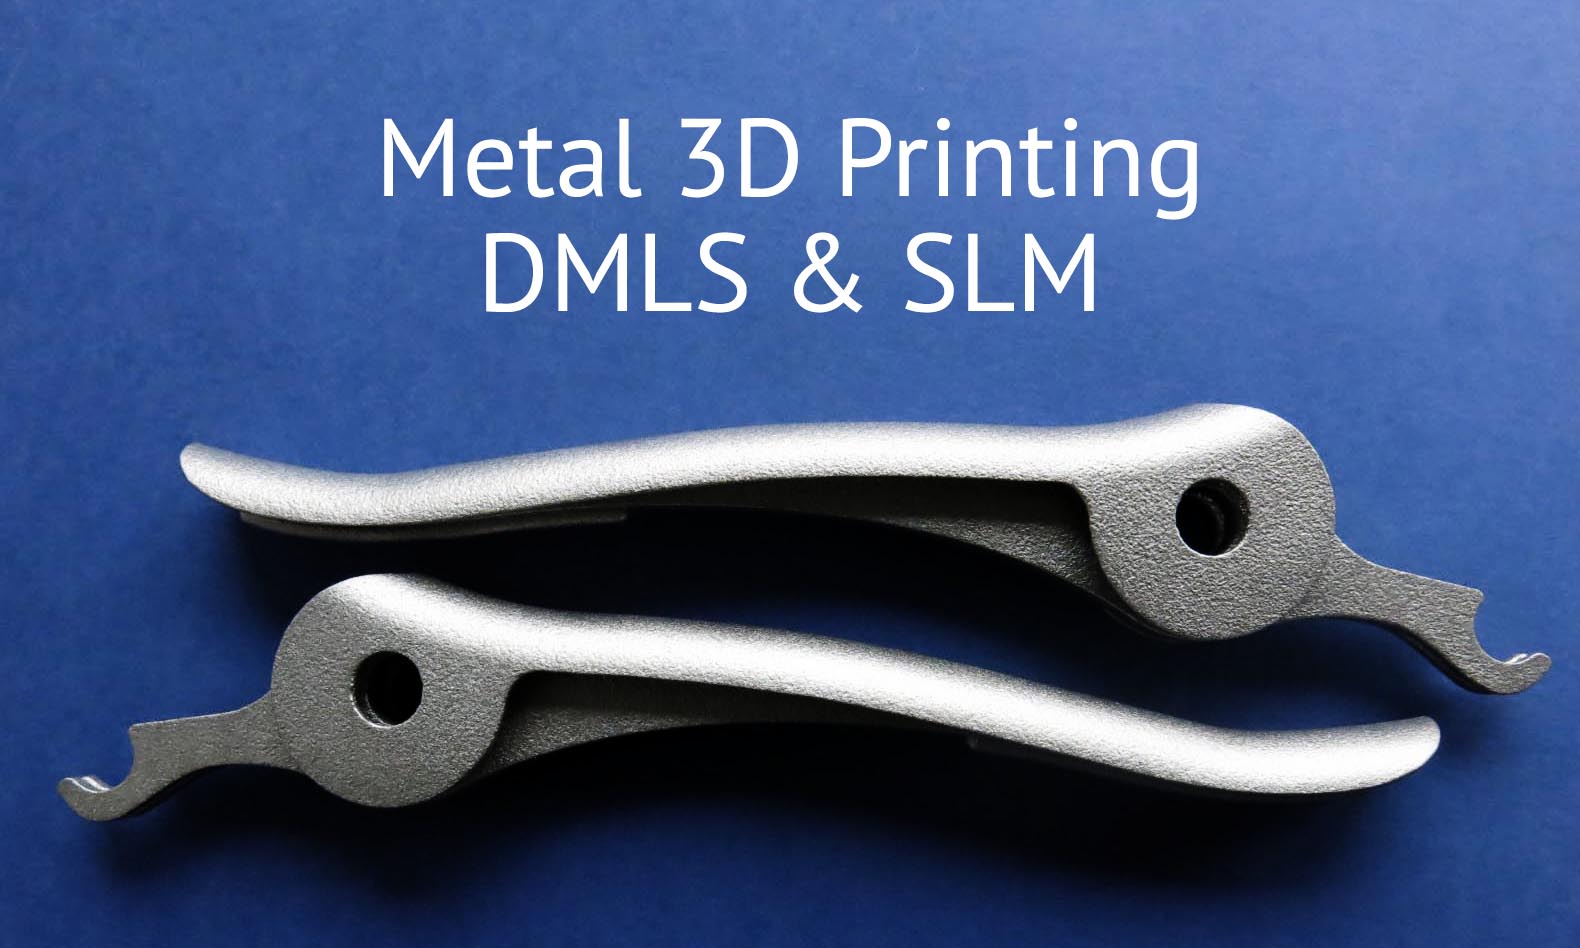 3D Printing Aluminium, Stainless Steel, and Titanium with the DMLS and SLM technologies